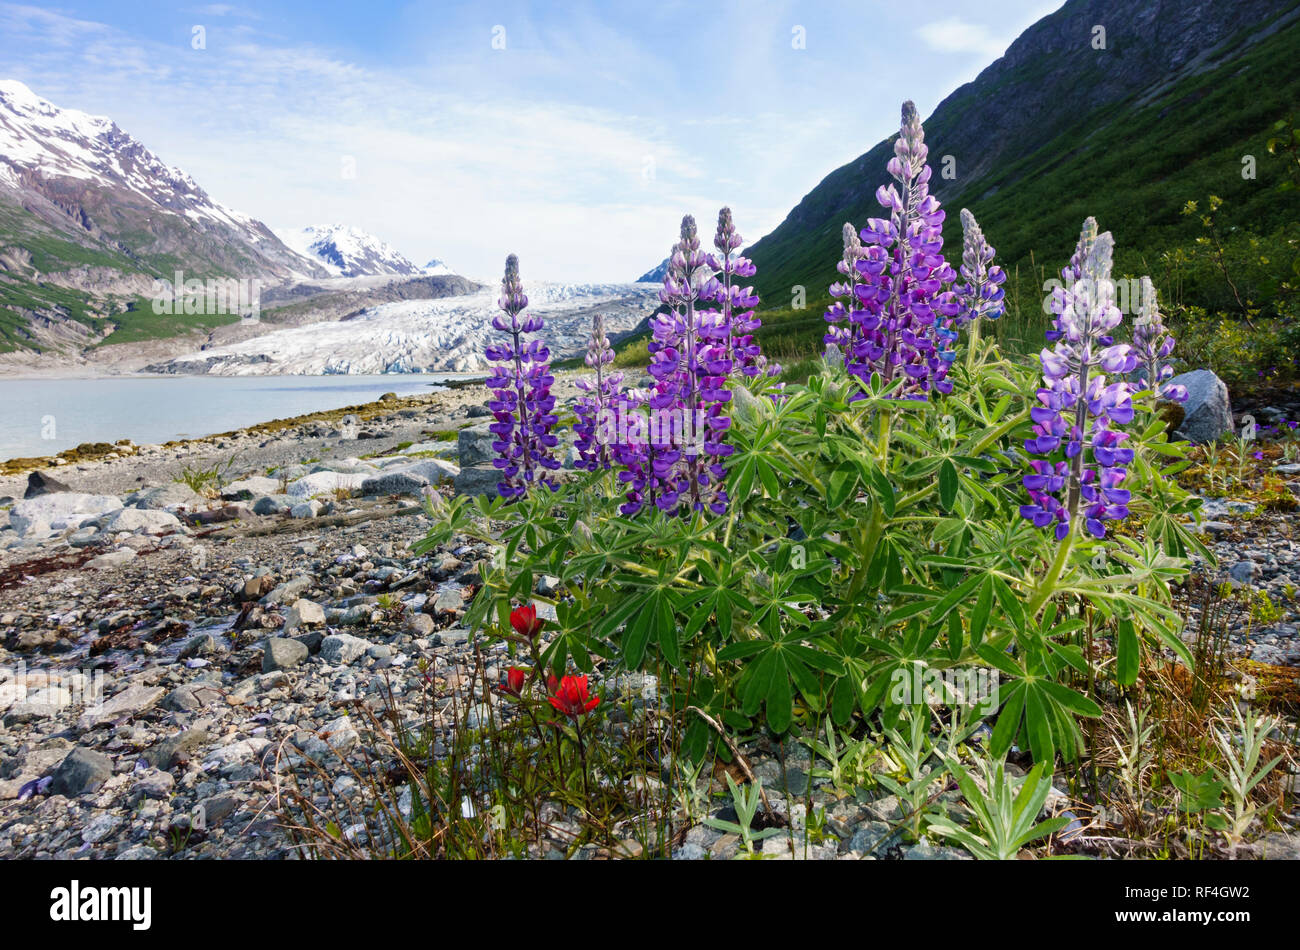 Purple lupine and red Indian paintbrush native wildflowers blooming near a glacier on a rocky beach shoreline in Glacier Bay National Park, Alaska Stock Photo